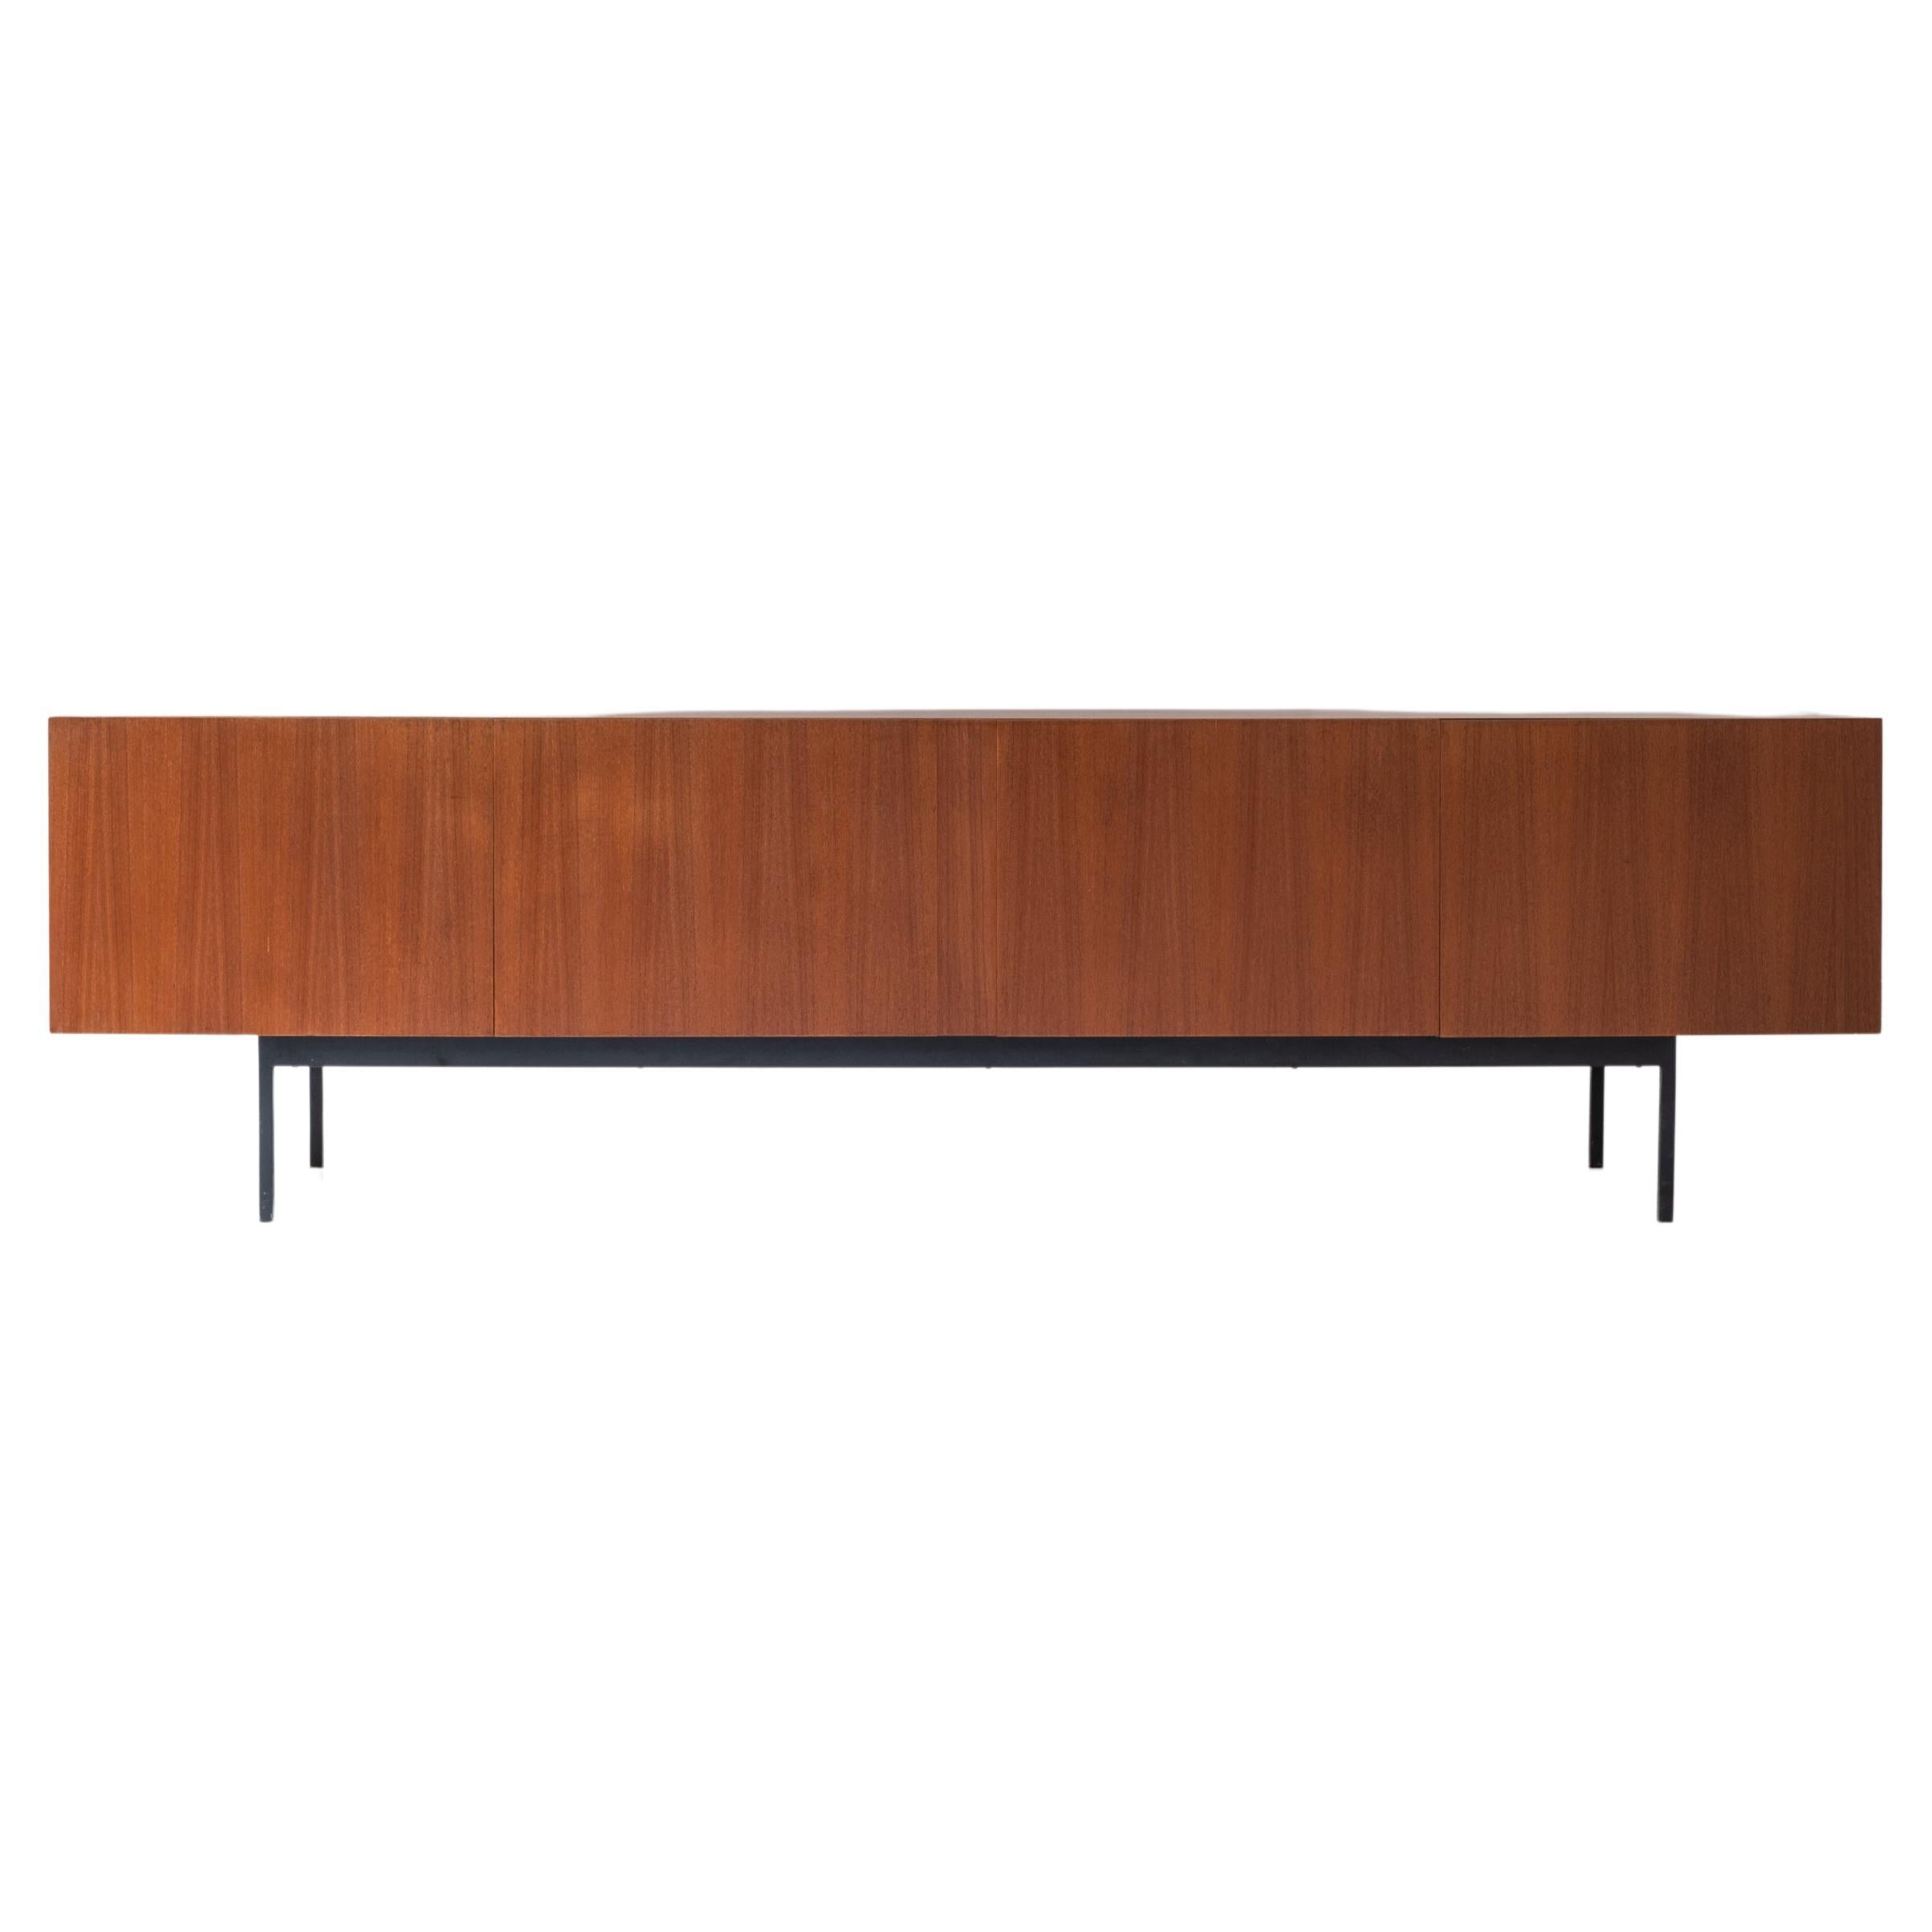 Minimalist ‘B40’ sideboard by Swiss architect Dieter Waeckerlin for Behr Möbel, Germany 1958. This sideboard is made out of teak and has a black lacquered steel frame. The inside is finished with maple wood removable trays and a bottle holder.